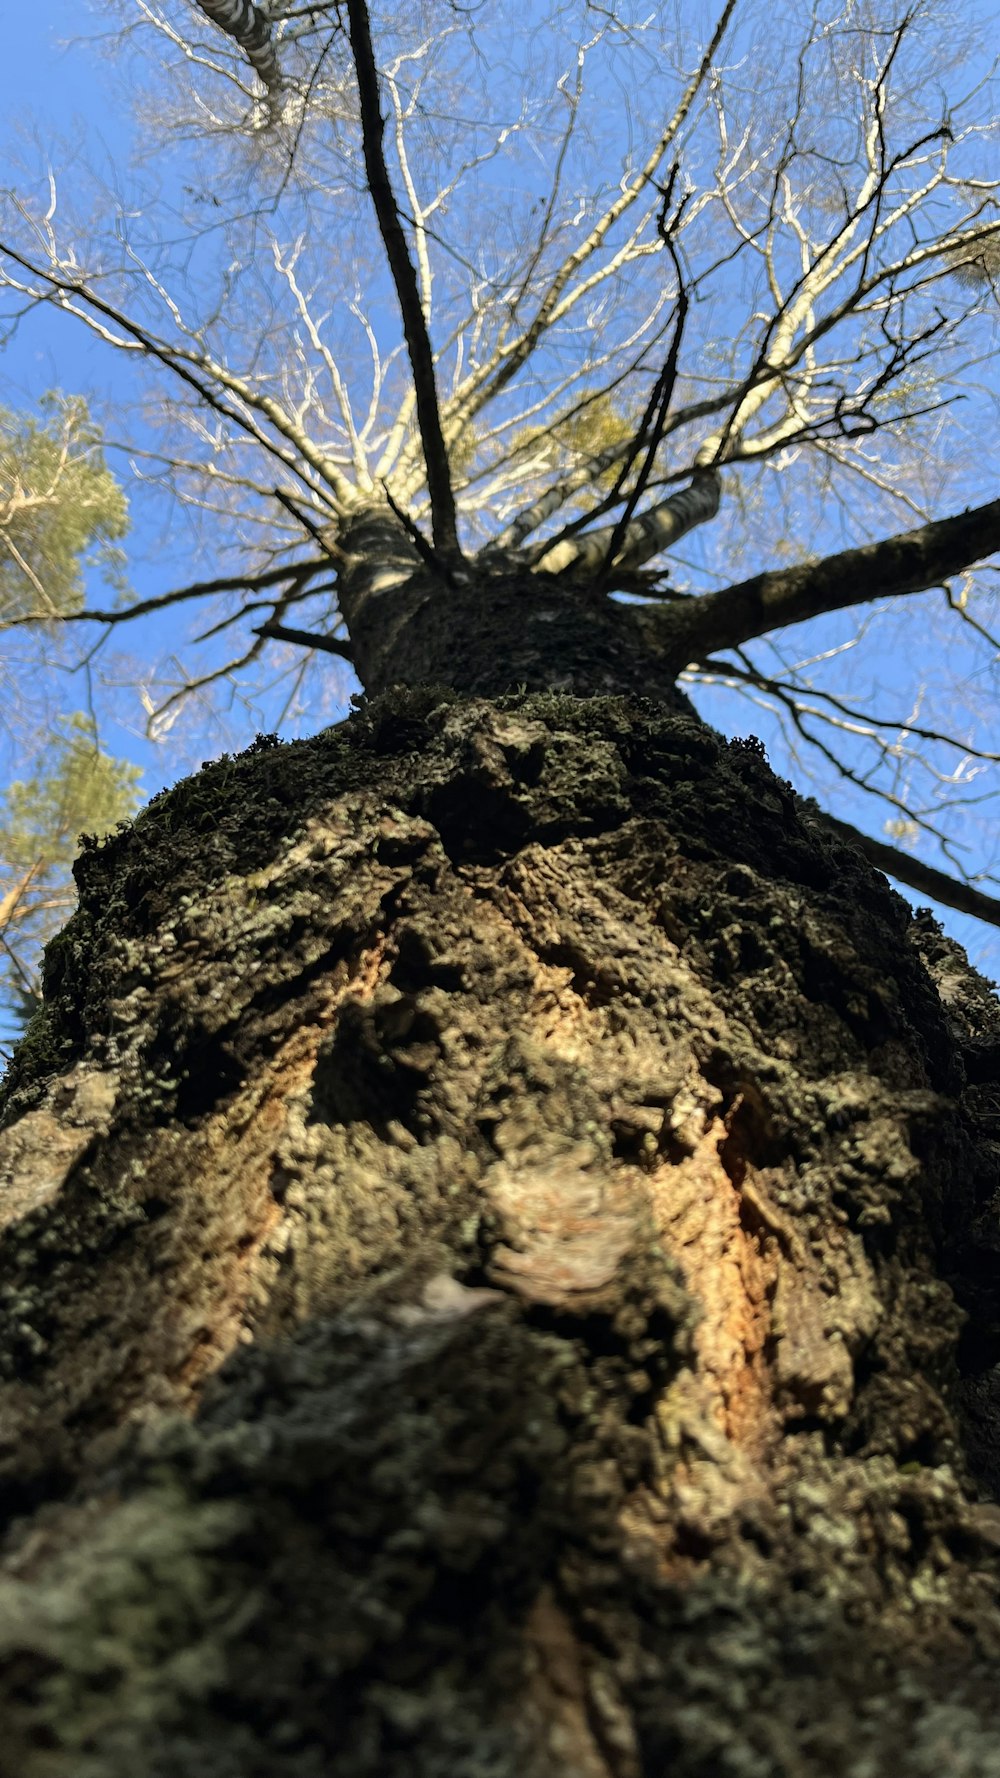 looking up at a tall tree with no leaves